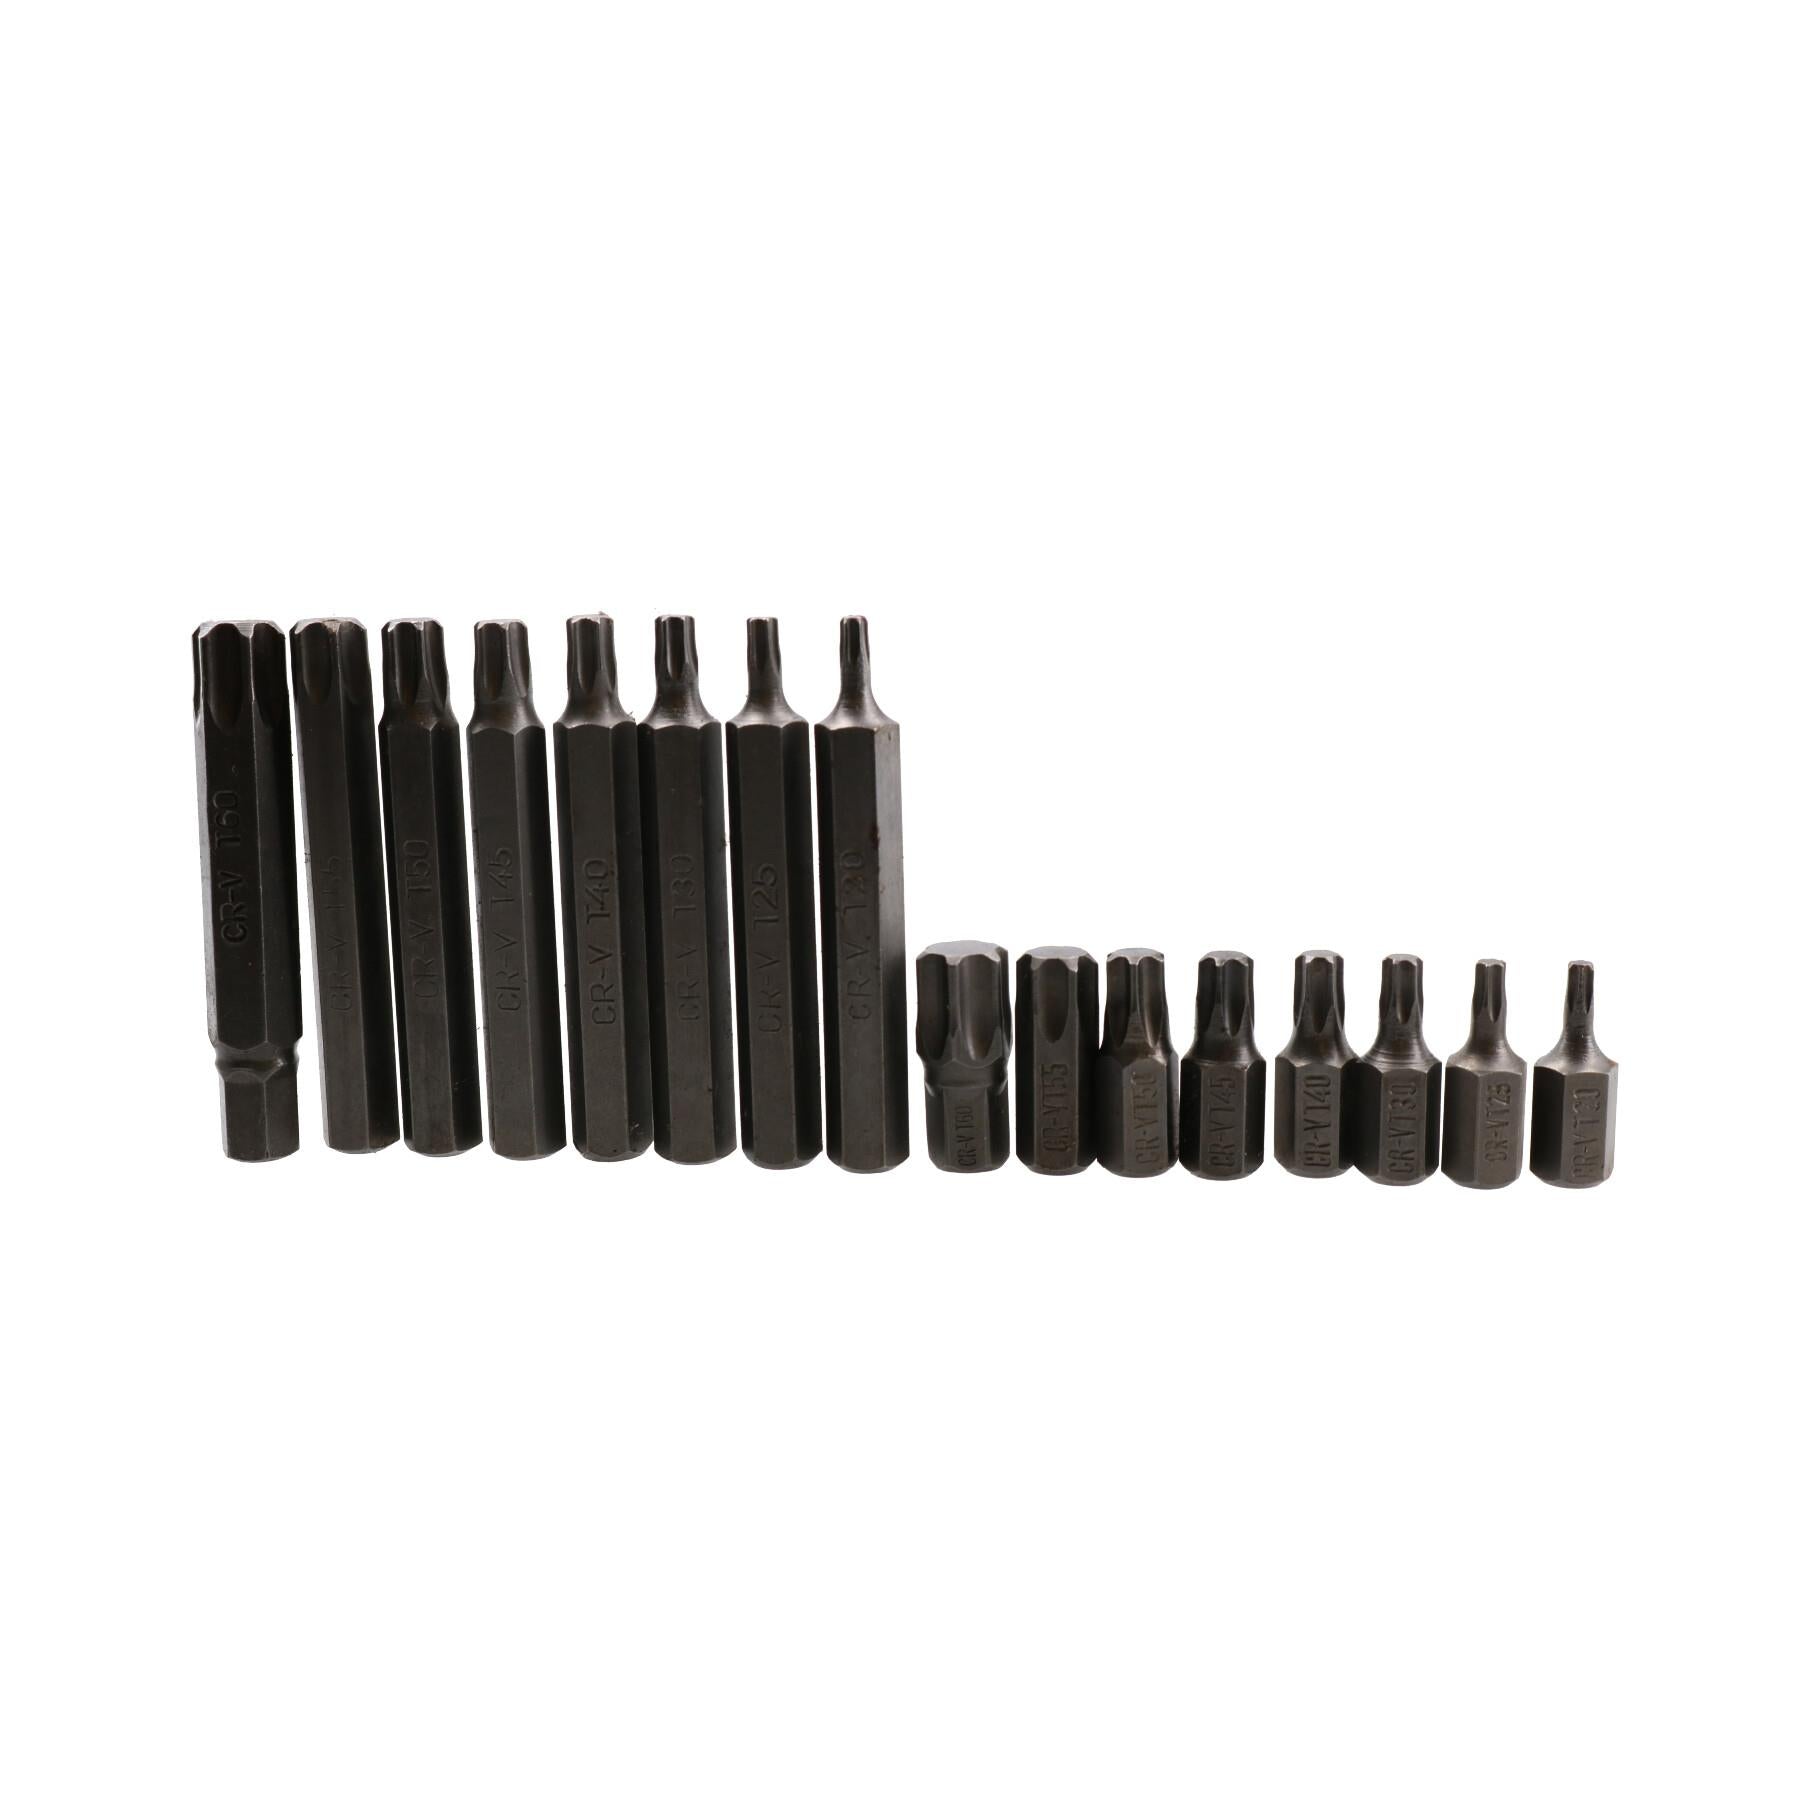 T20 – T60 Torx Star Male Bits With 10mm Shank 30mm or 75mm Length